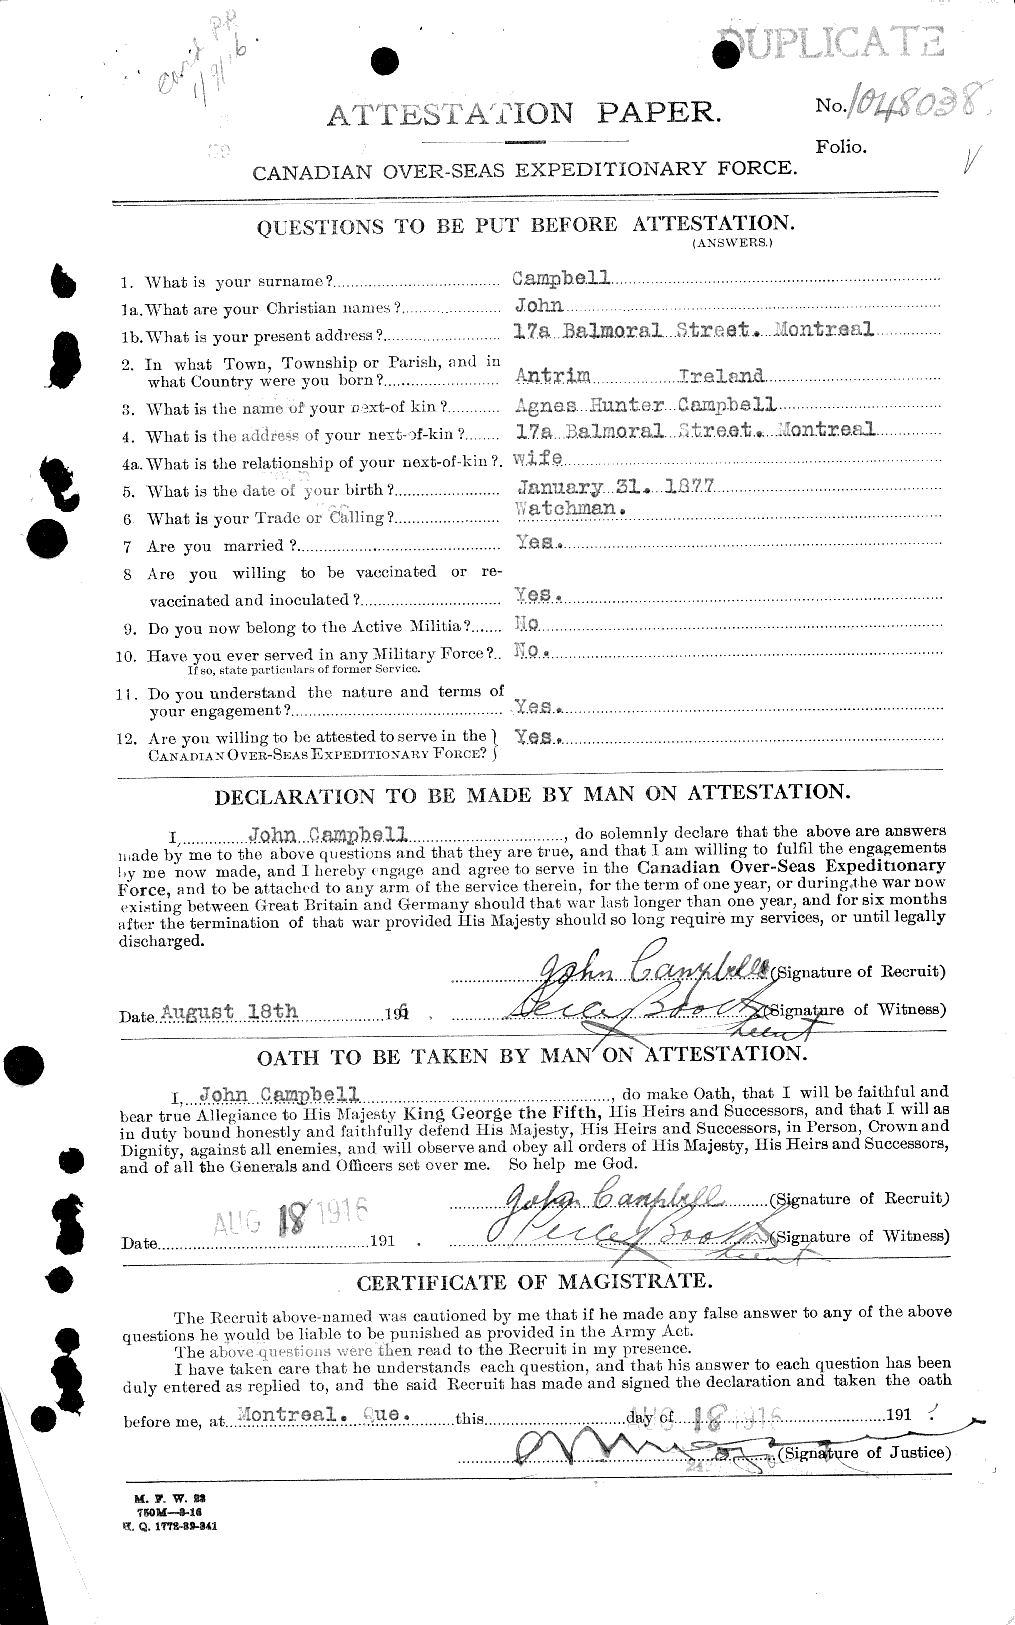 Personnel Records of the First World War - CEF 008473a